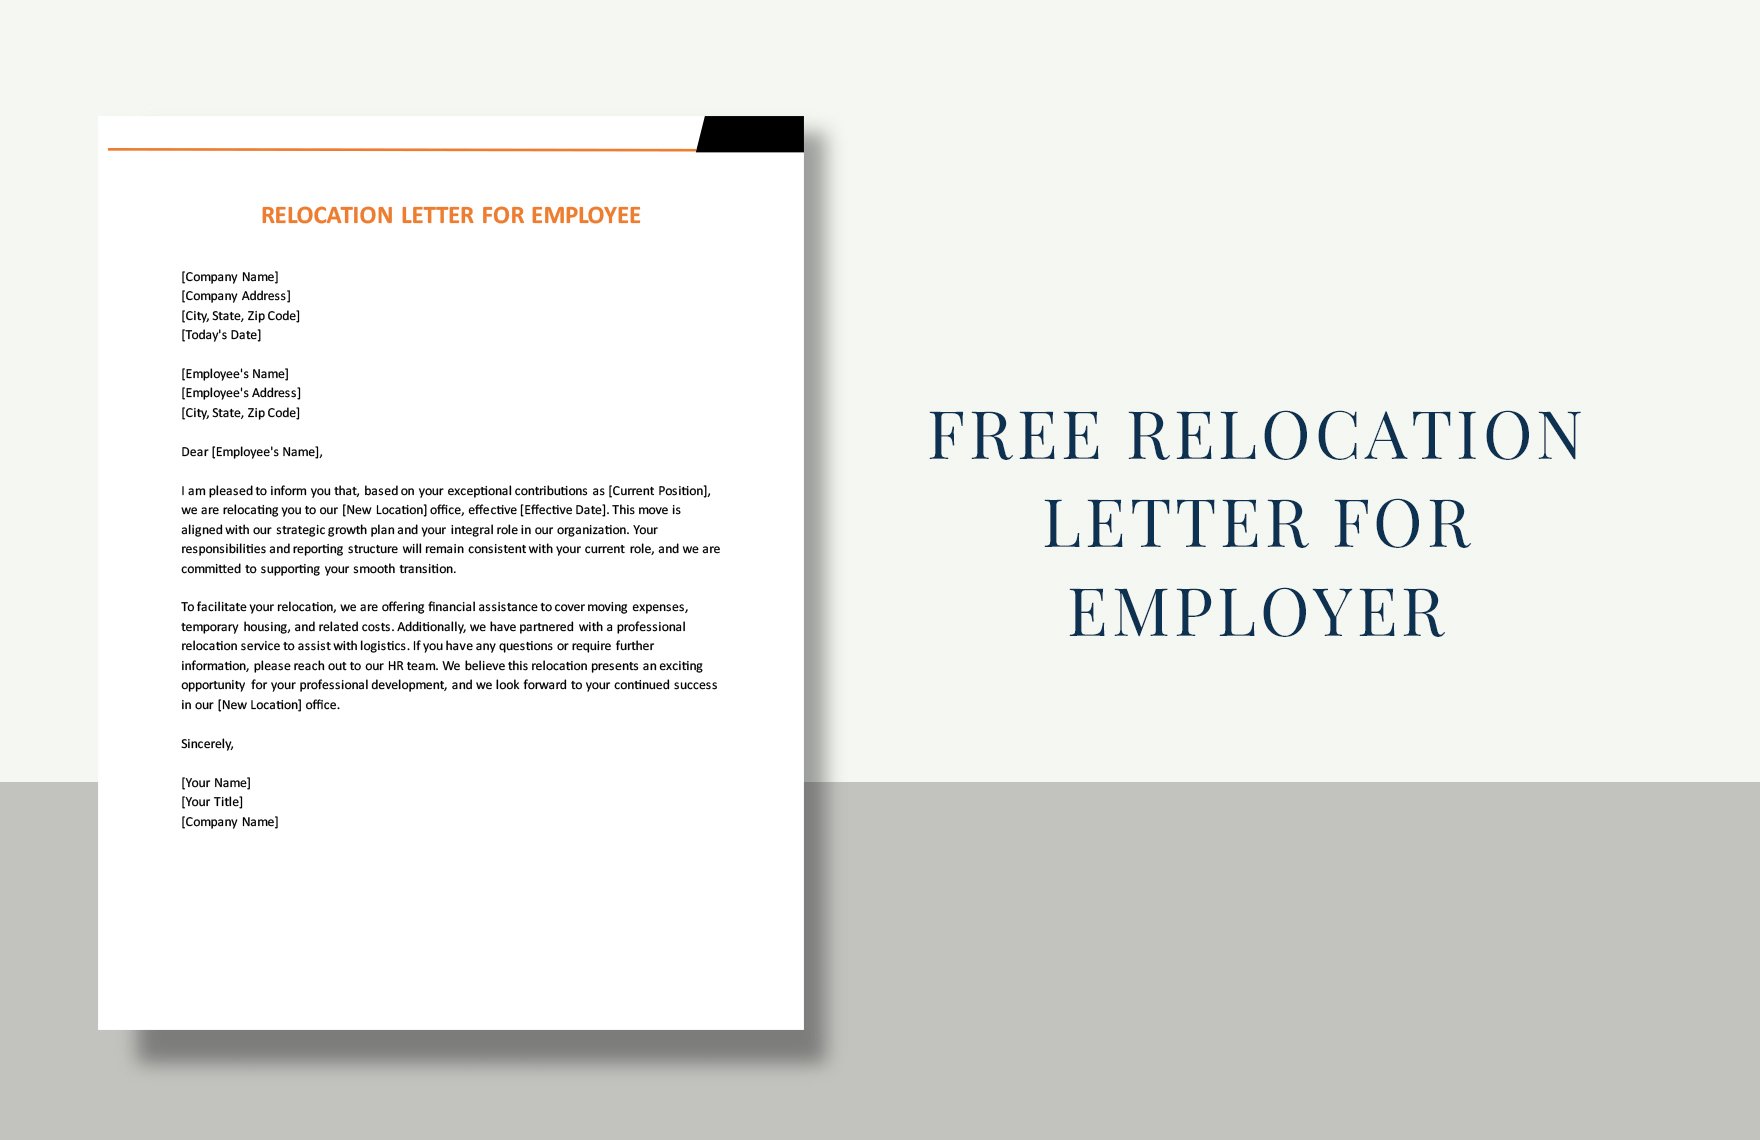 Relocation Letter For Employee